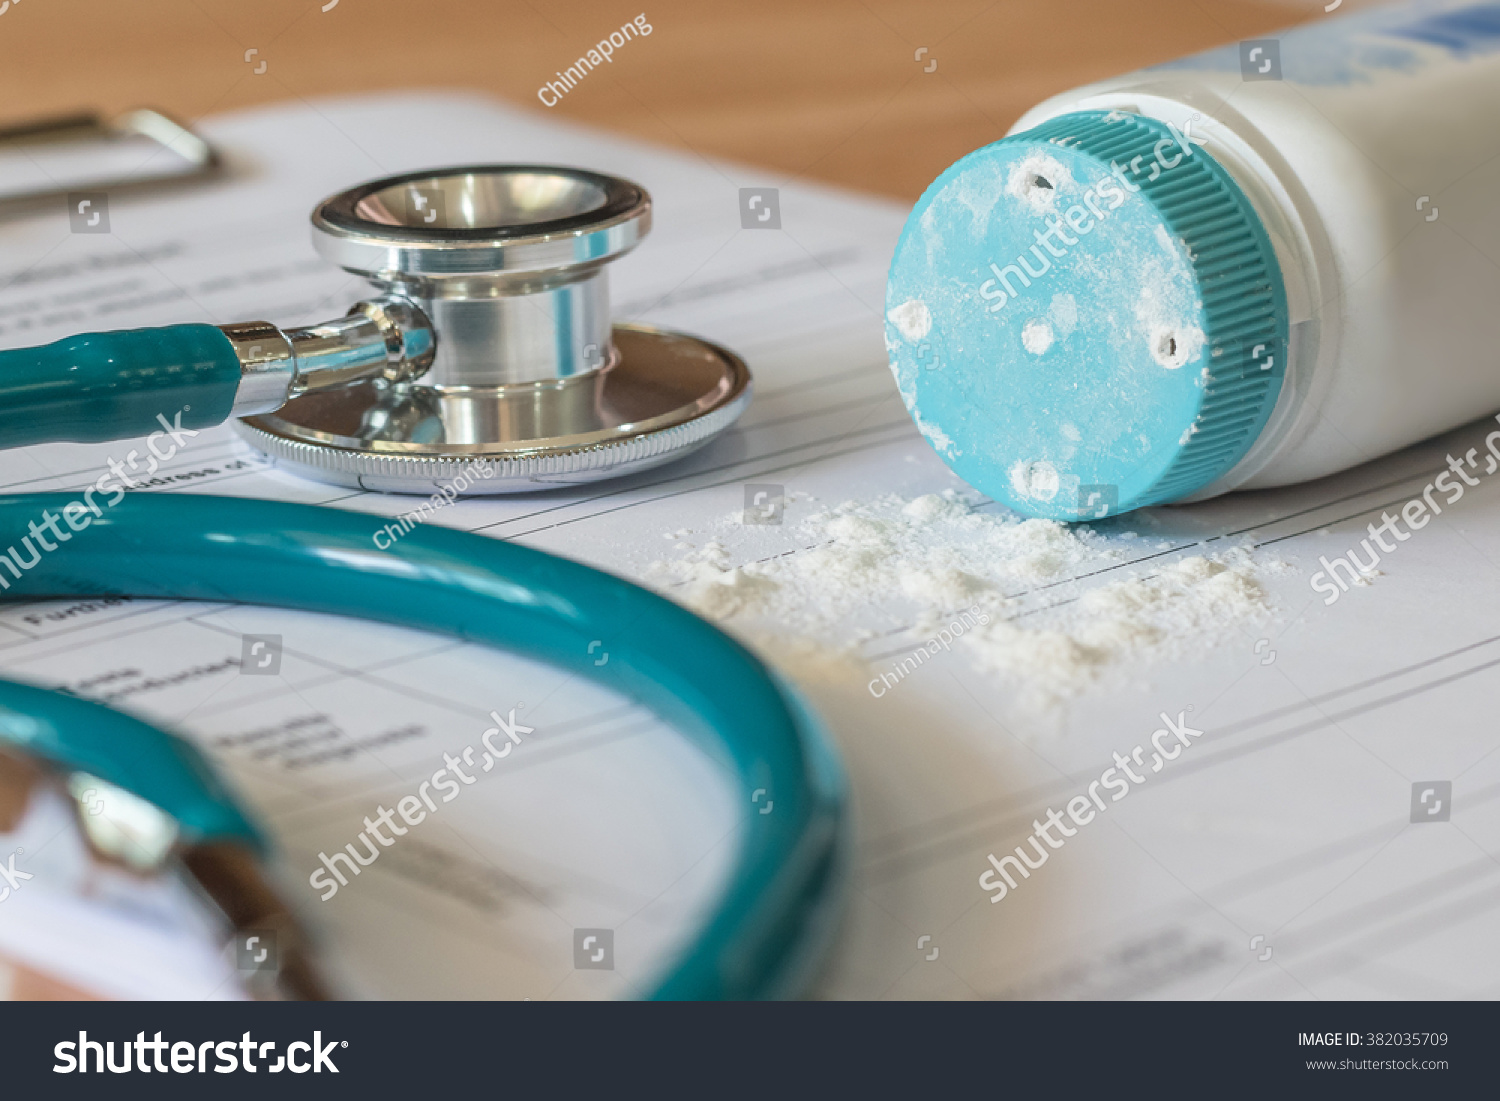 Baby powder product with talc mineral spilling over diagnosis record paper on doctor's pad with stethoscope in teal color background #382035709